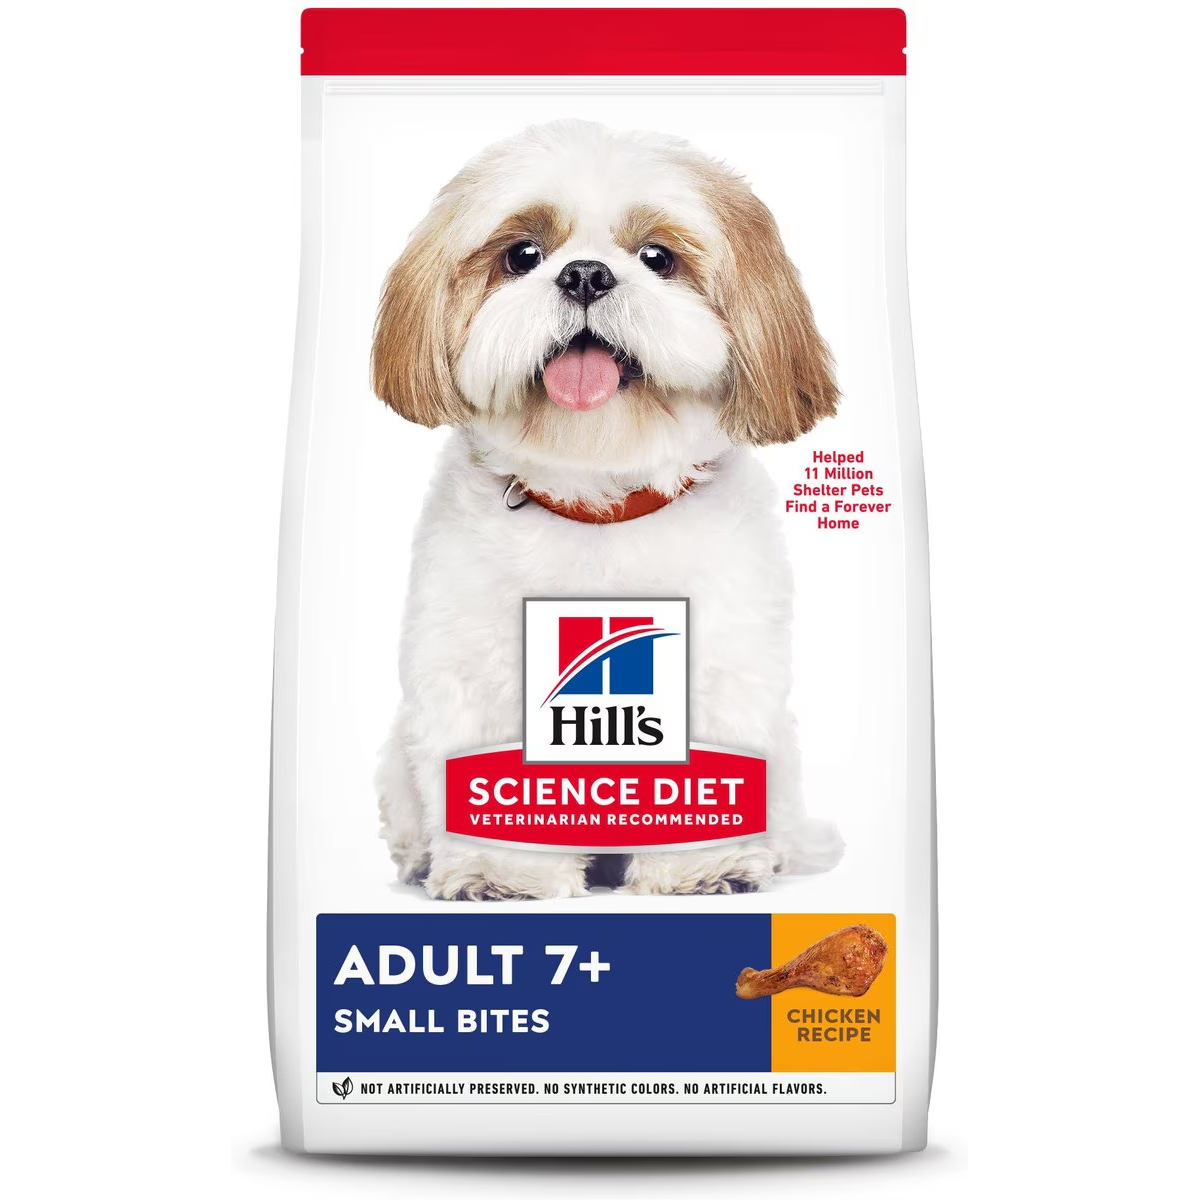 Hill’s Science Diet Adult 7+ Small Bites Dog Food